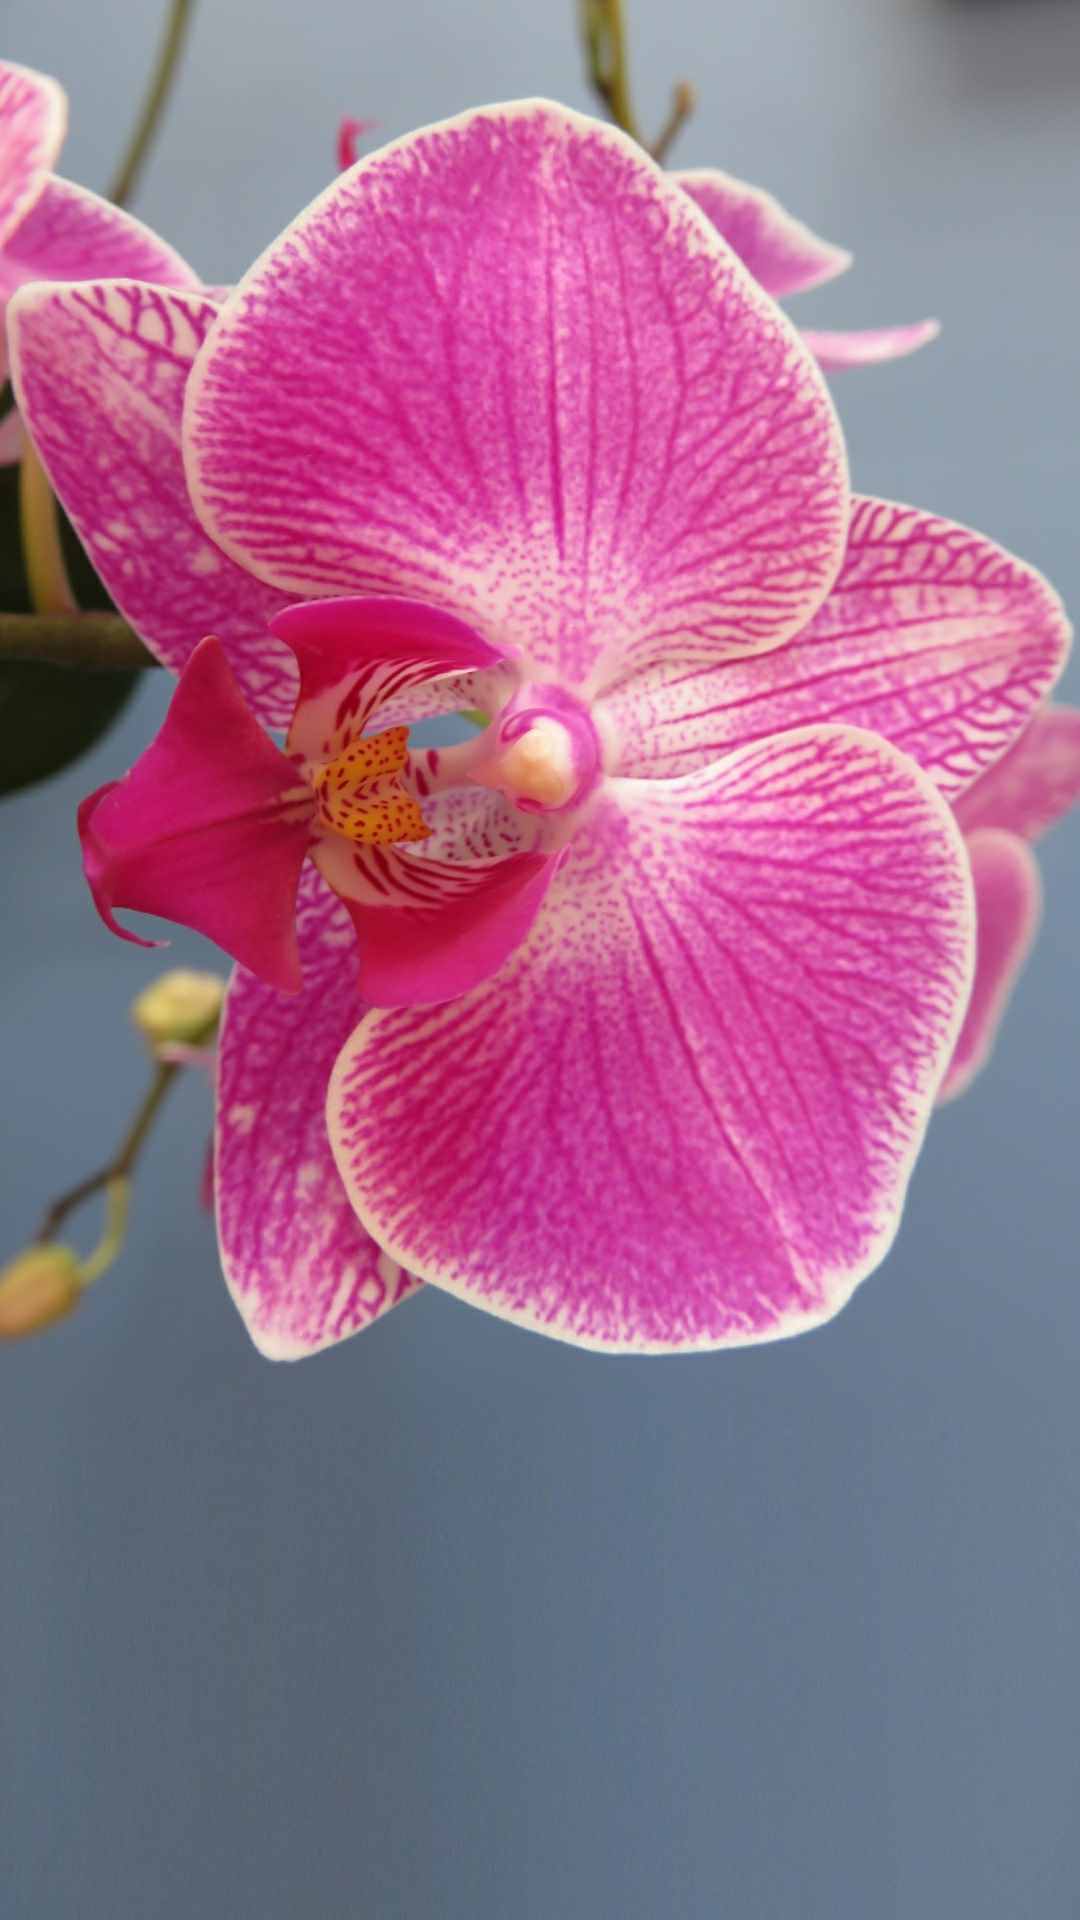 Orchid iPhone Wallpaper for Flower